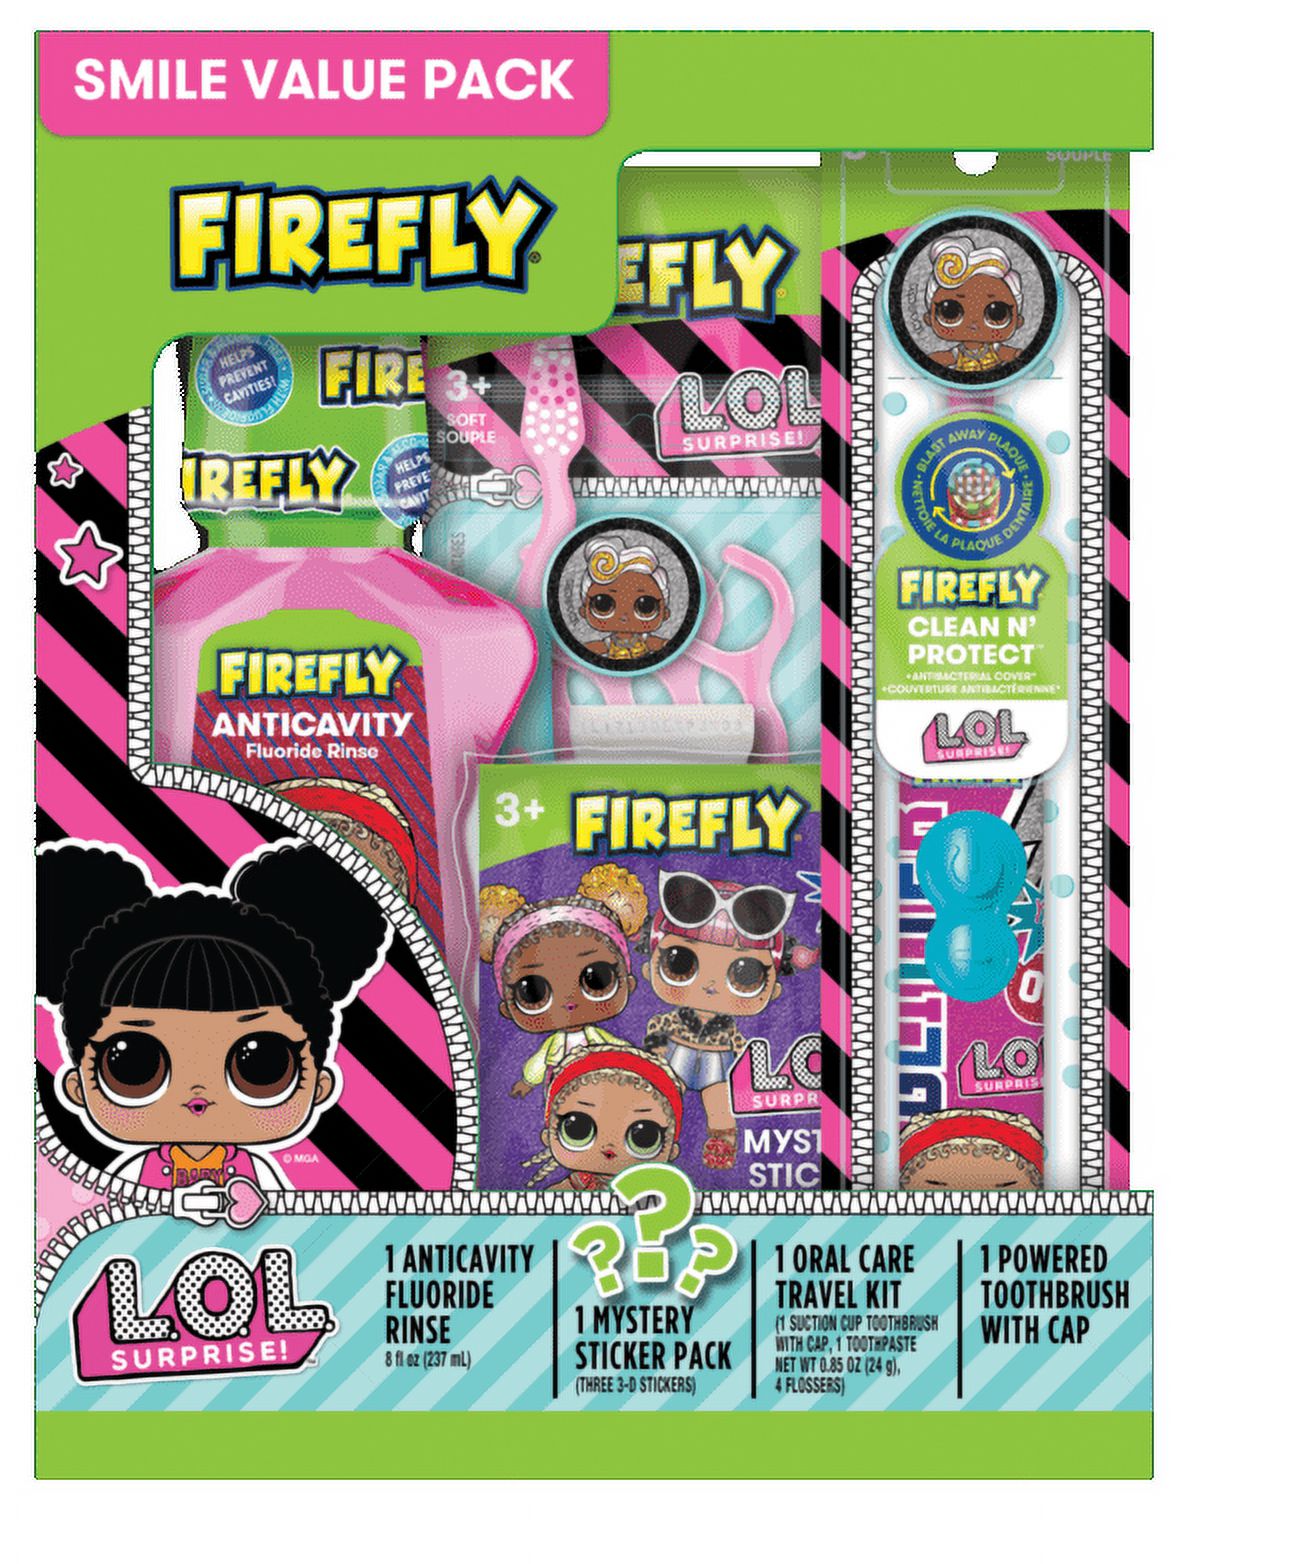 Firefly L.O.L. Surprise! Smile Value Pack - image 1 of 5